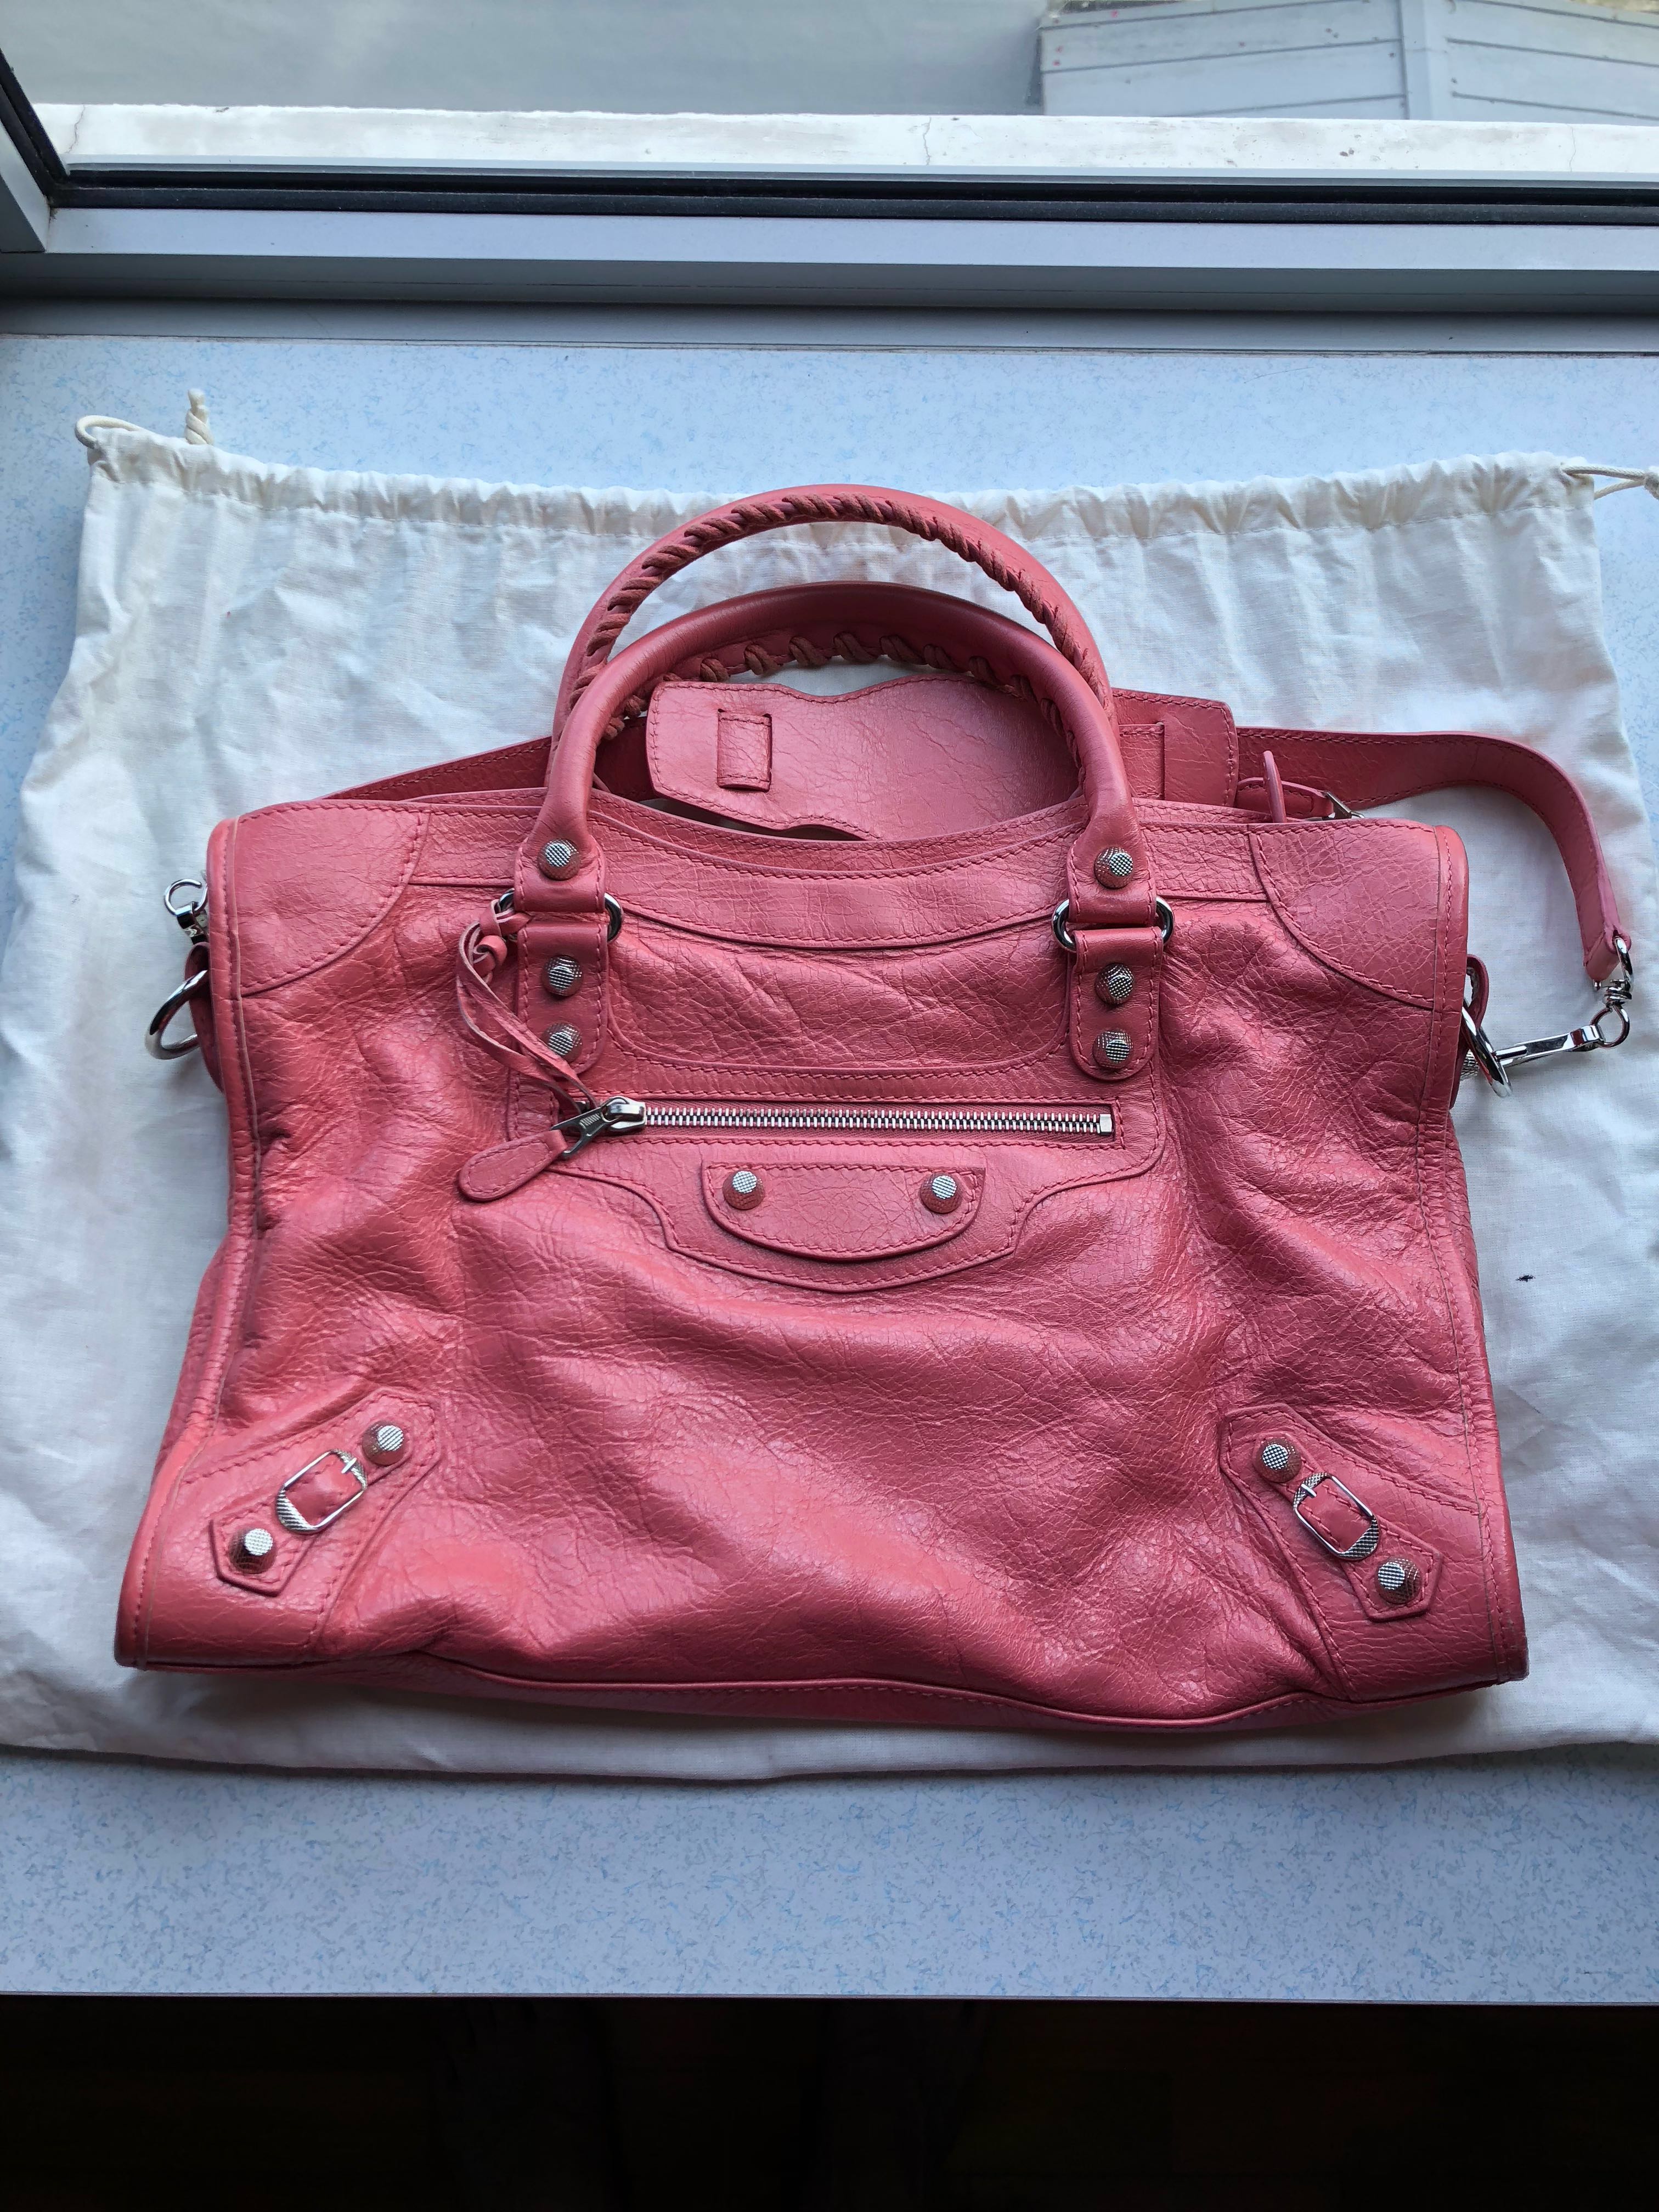 begynde Forhandle Opera Balenciaga City - Rose Jaipur Femur, Women's Fashion, Bags & Wallets,  Purses & Pouches on Carousell